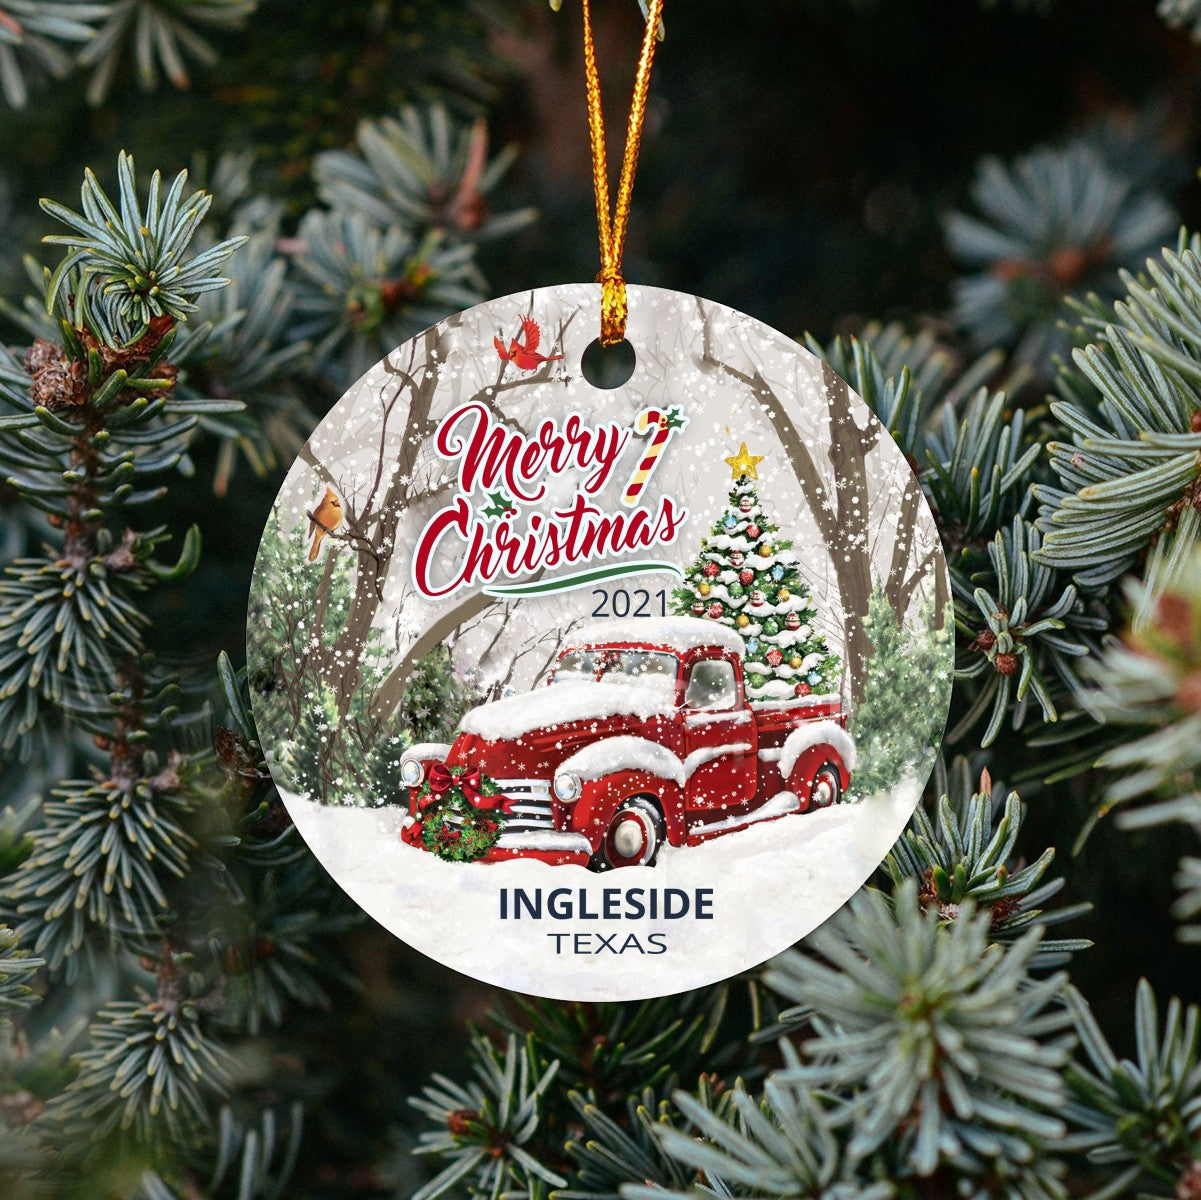 Christmas Tree Ornaments Ingleside - Ornament With Name City, State Ingleside Texas TX Ornament - Red Truck Xmas Ornaments 3'' Plastic Gift For Family, Friend And Housewarming